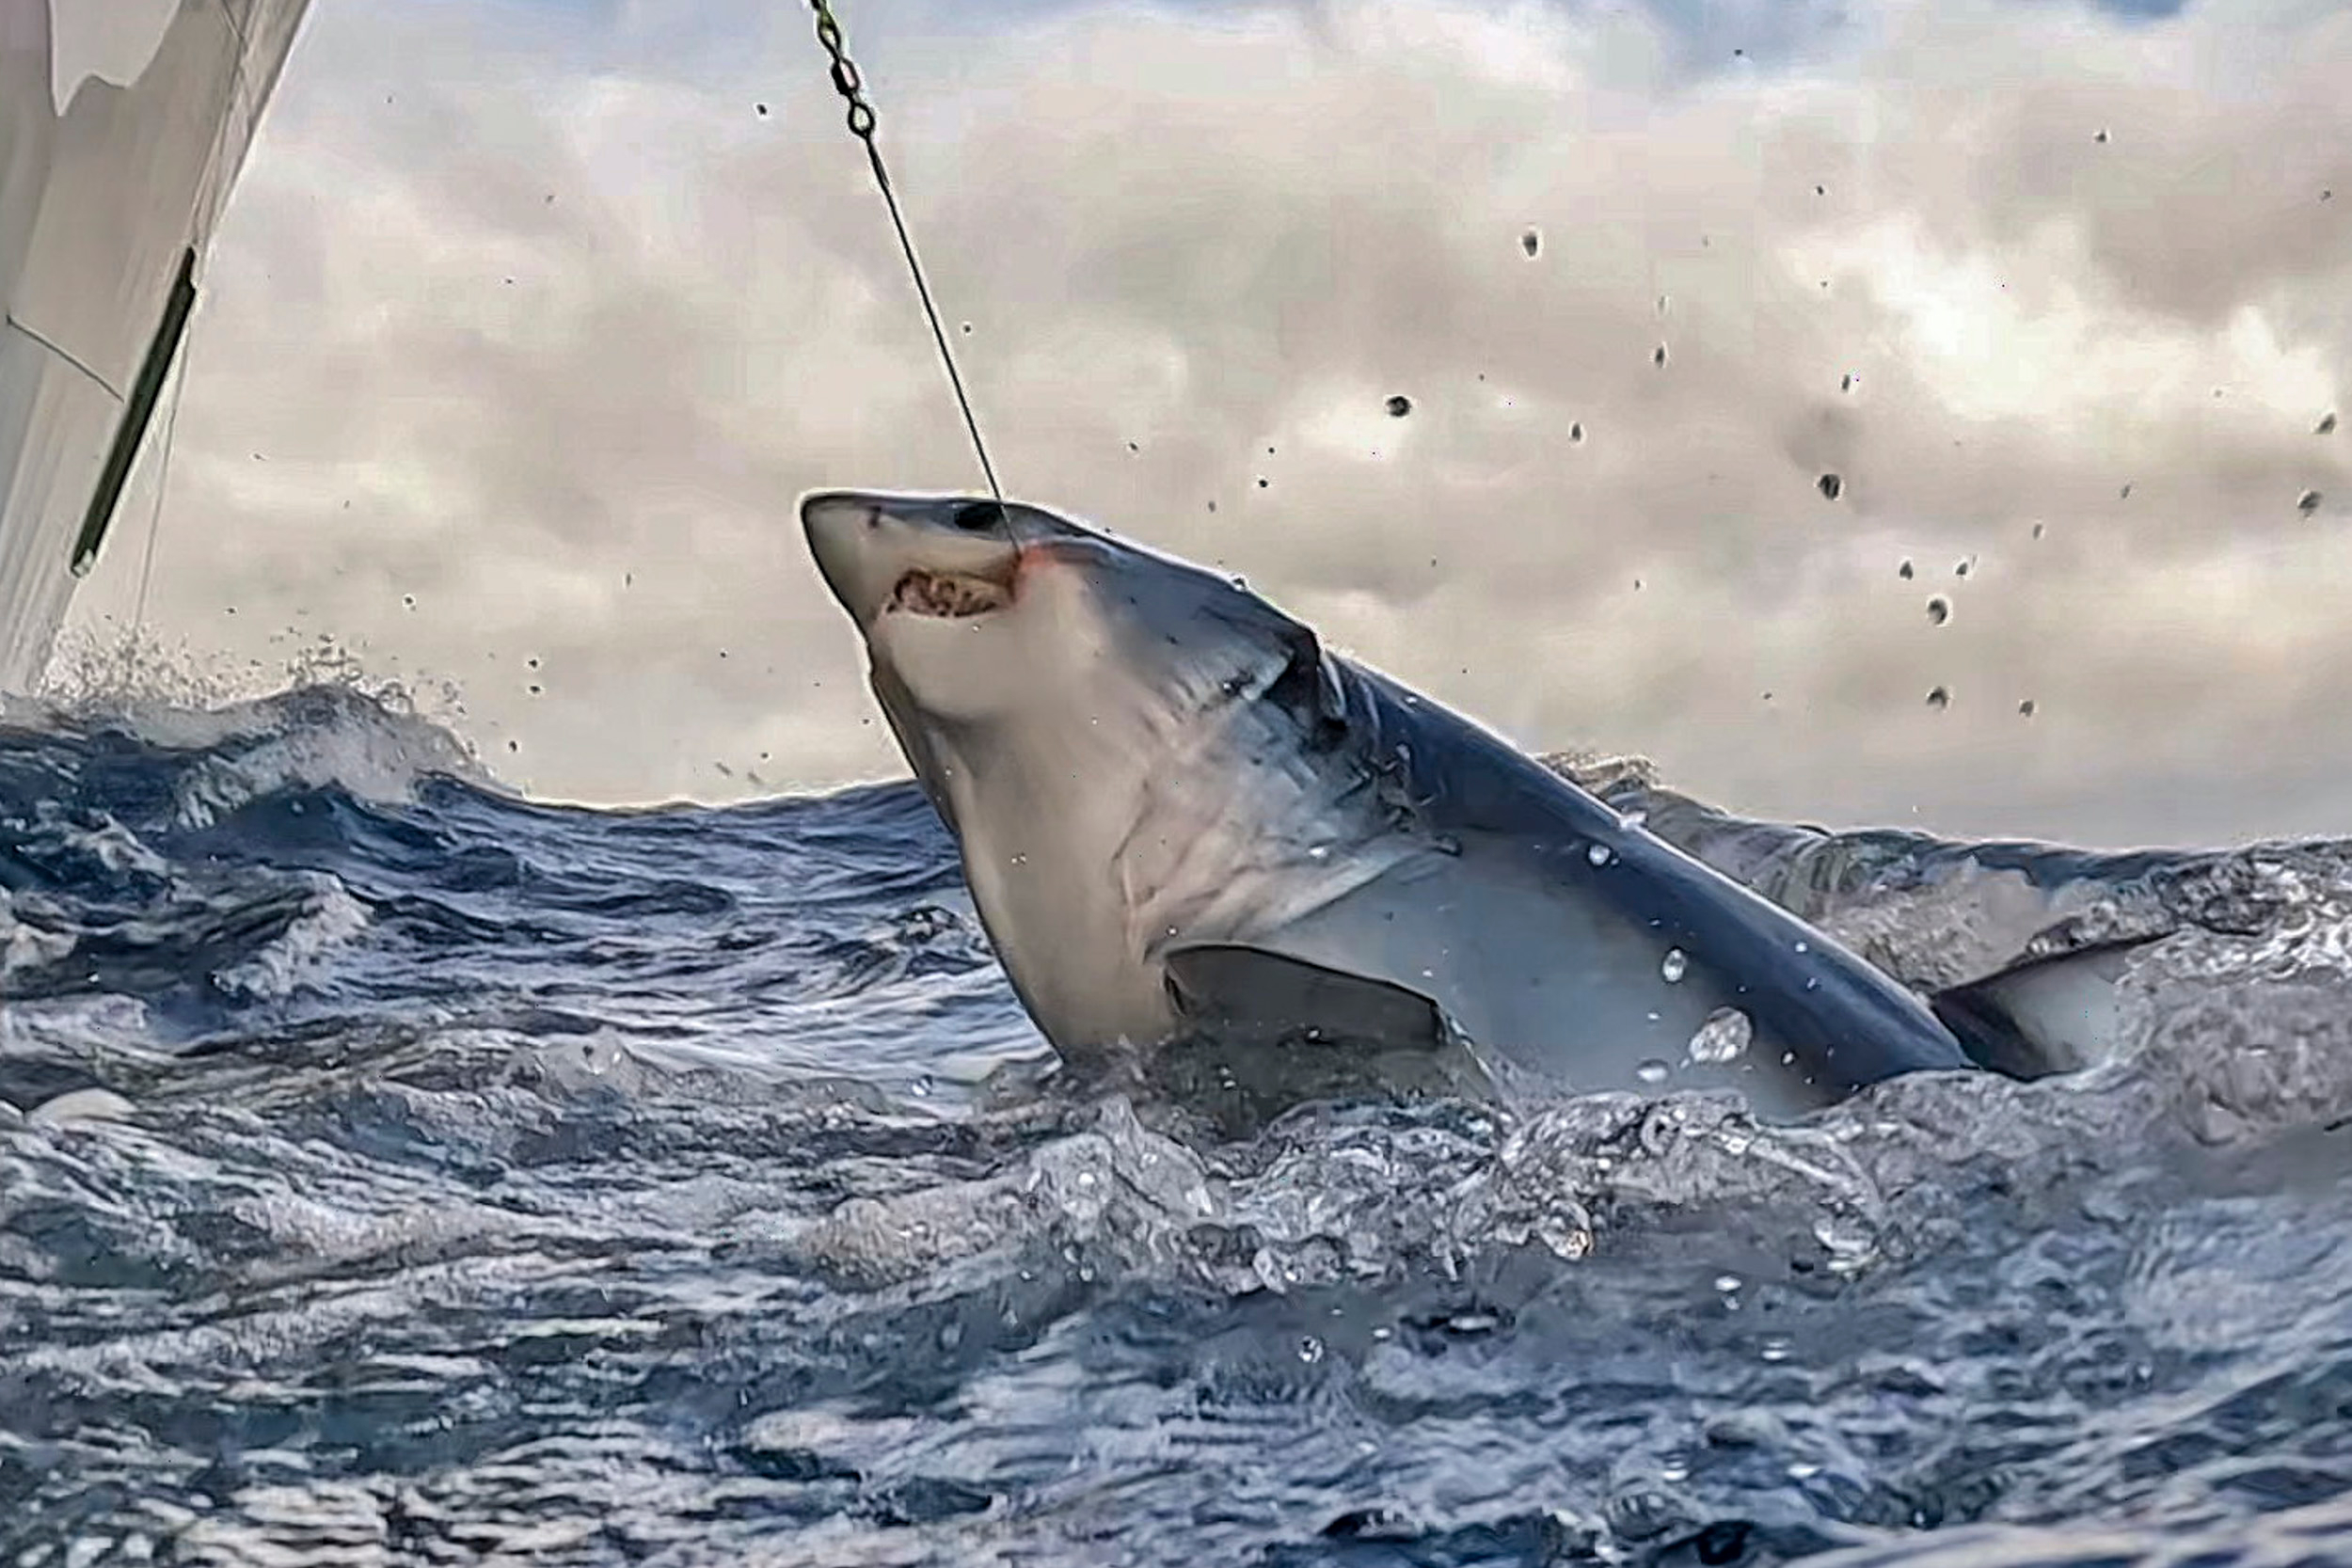 A shark's body head with its mouth slightly open and a line coming from it are rising from a wavey sea, with a vessel just visible in the corner of the frame